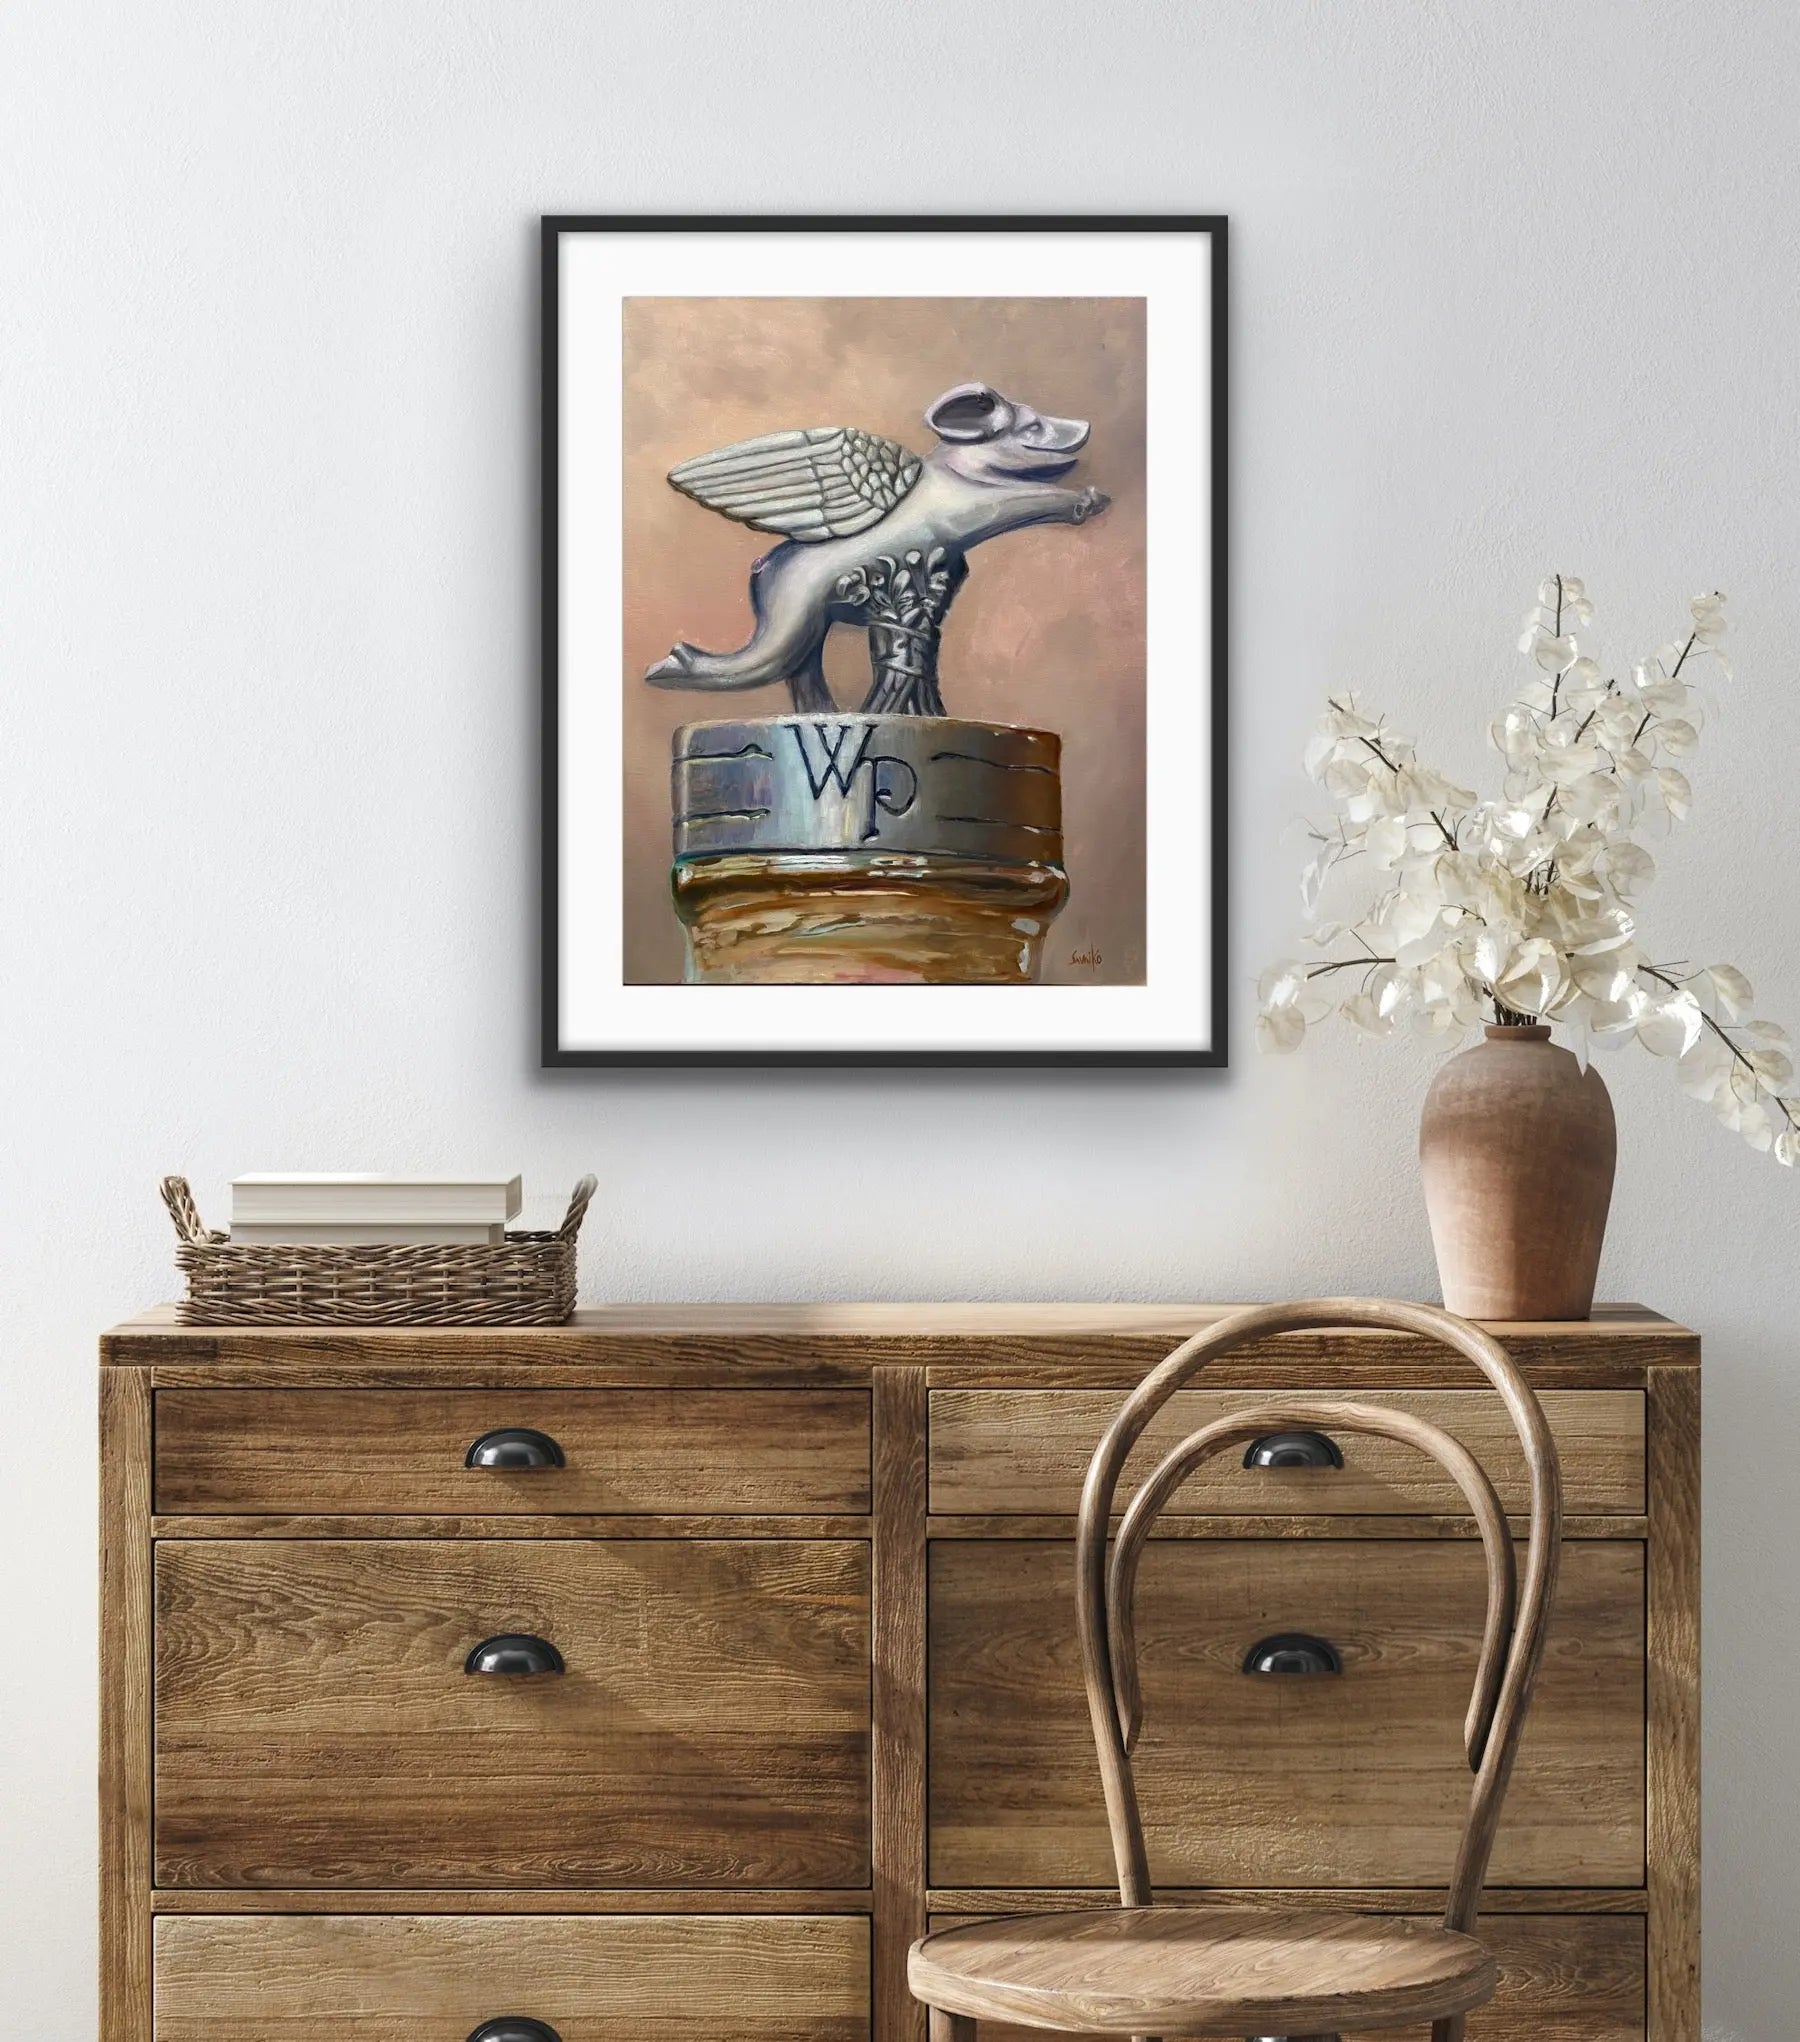 Premium Print - Whistle Pig - When Pigs Can Fly! - Max Savaiko Art